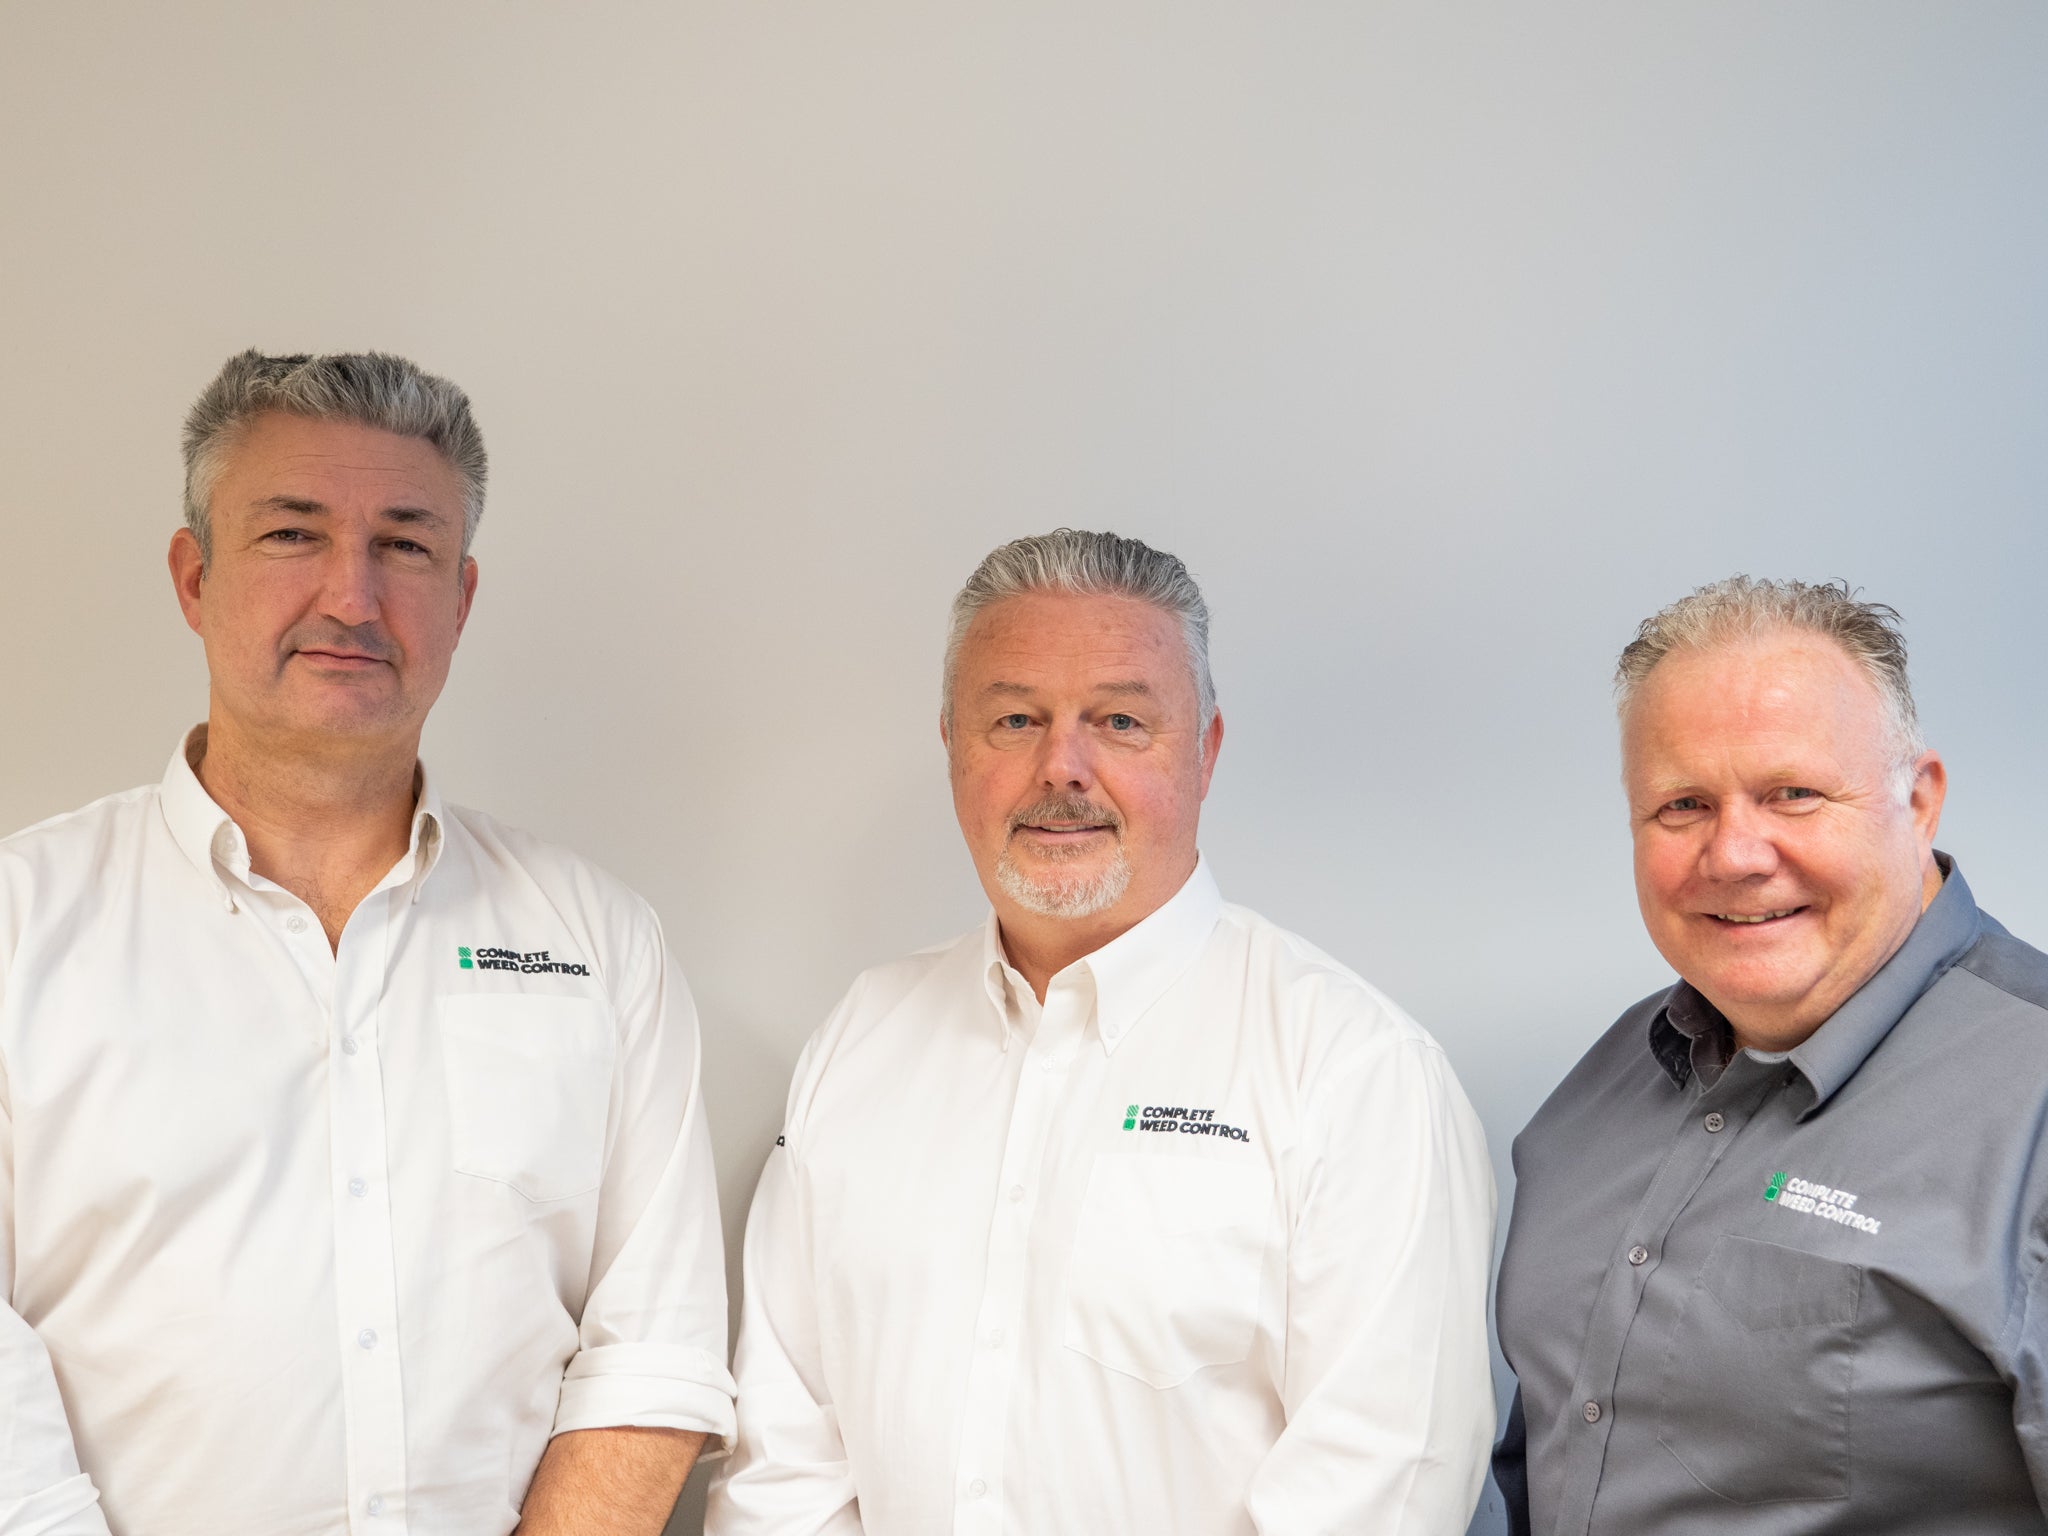 Complete Weed Control bolsters sales function with dual appointments for future growth